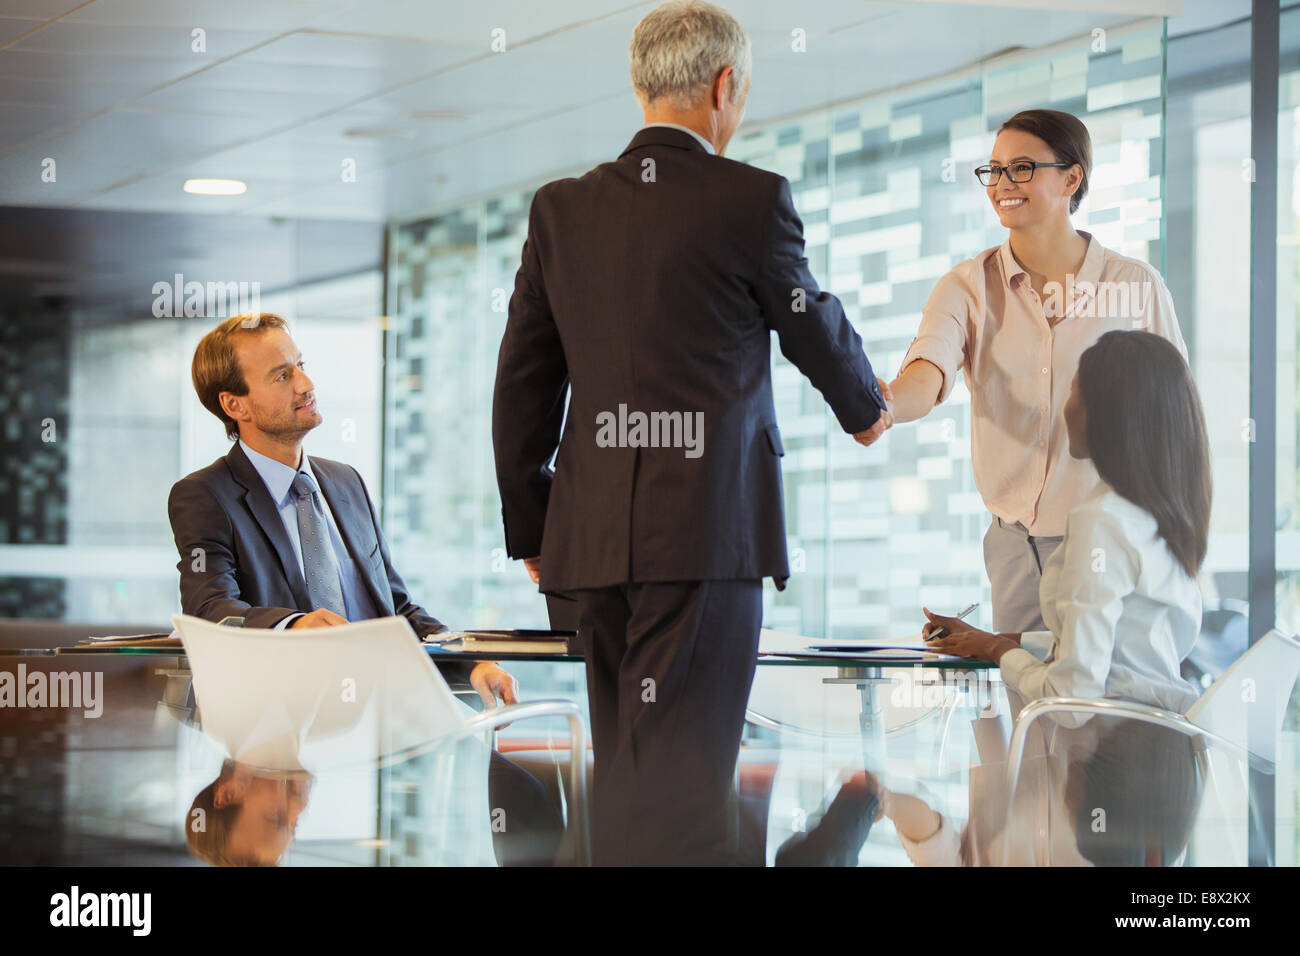 Business people shaking hands in office building Stock Photo